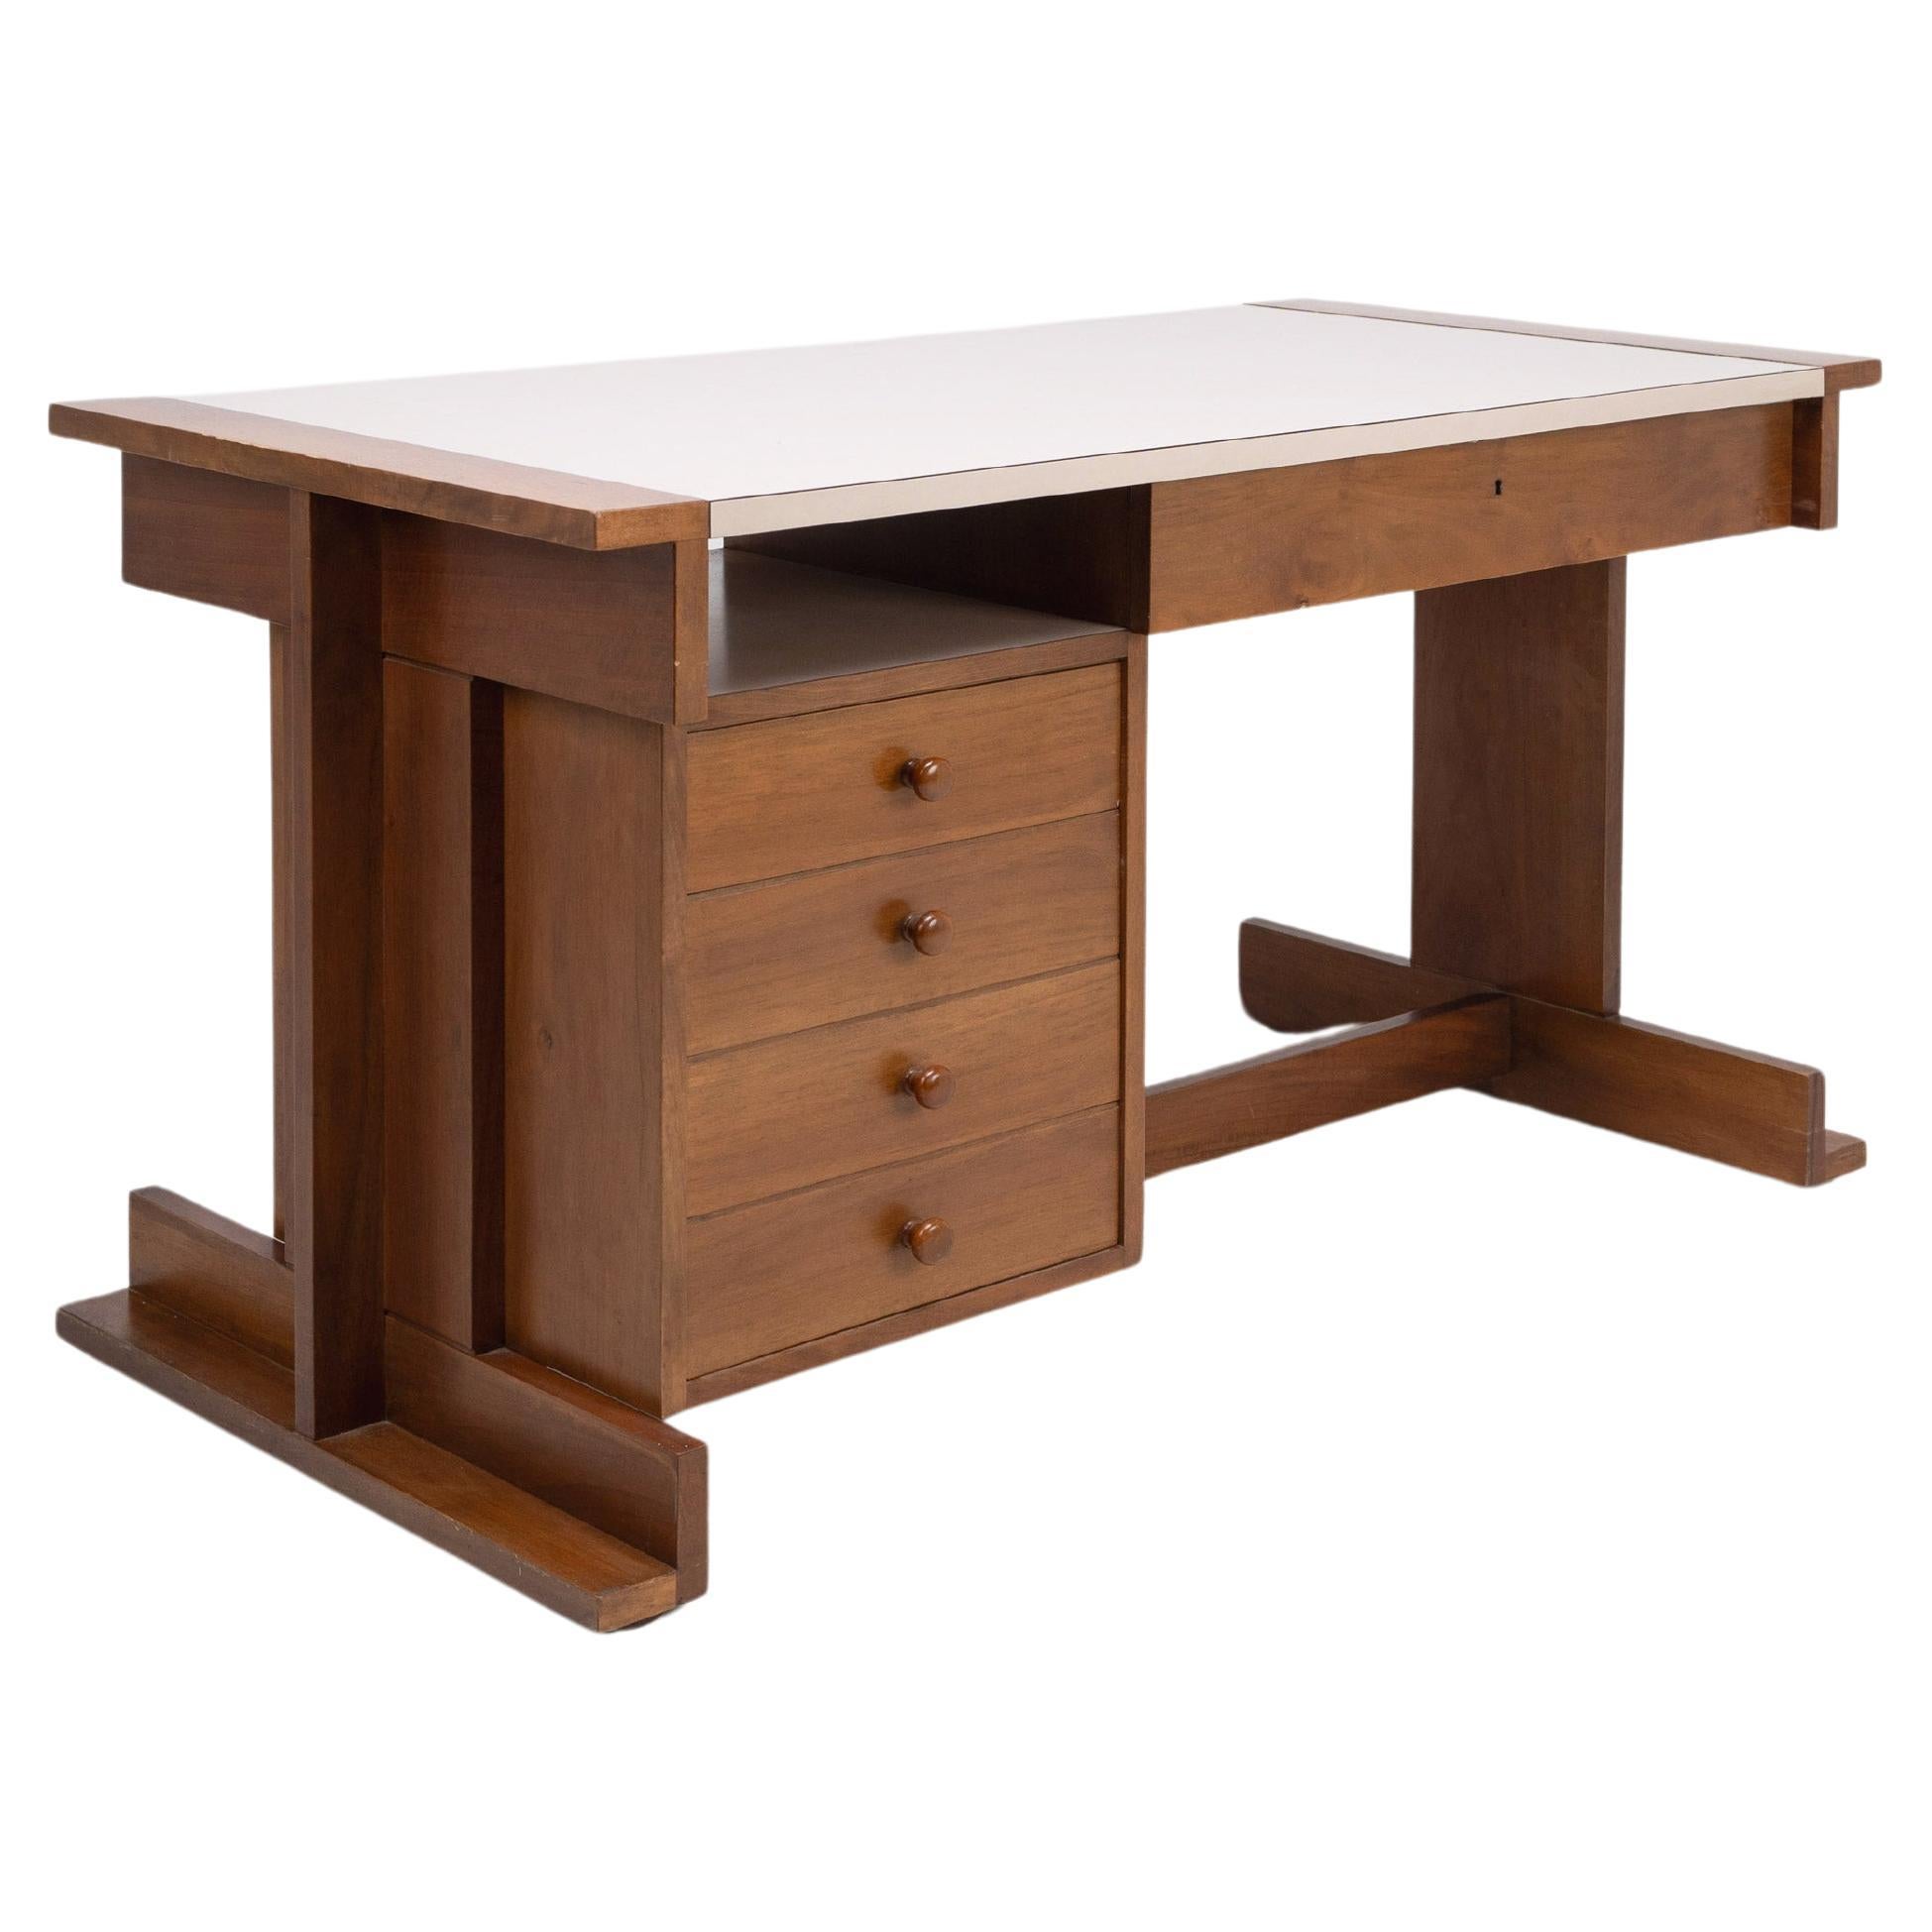 Constructivist Wood and Melamine Desk, Italy, c.1950 For Sale